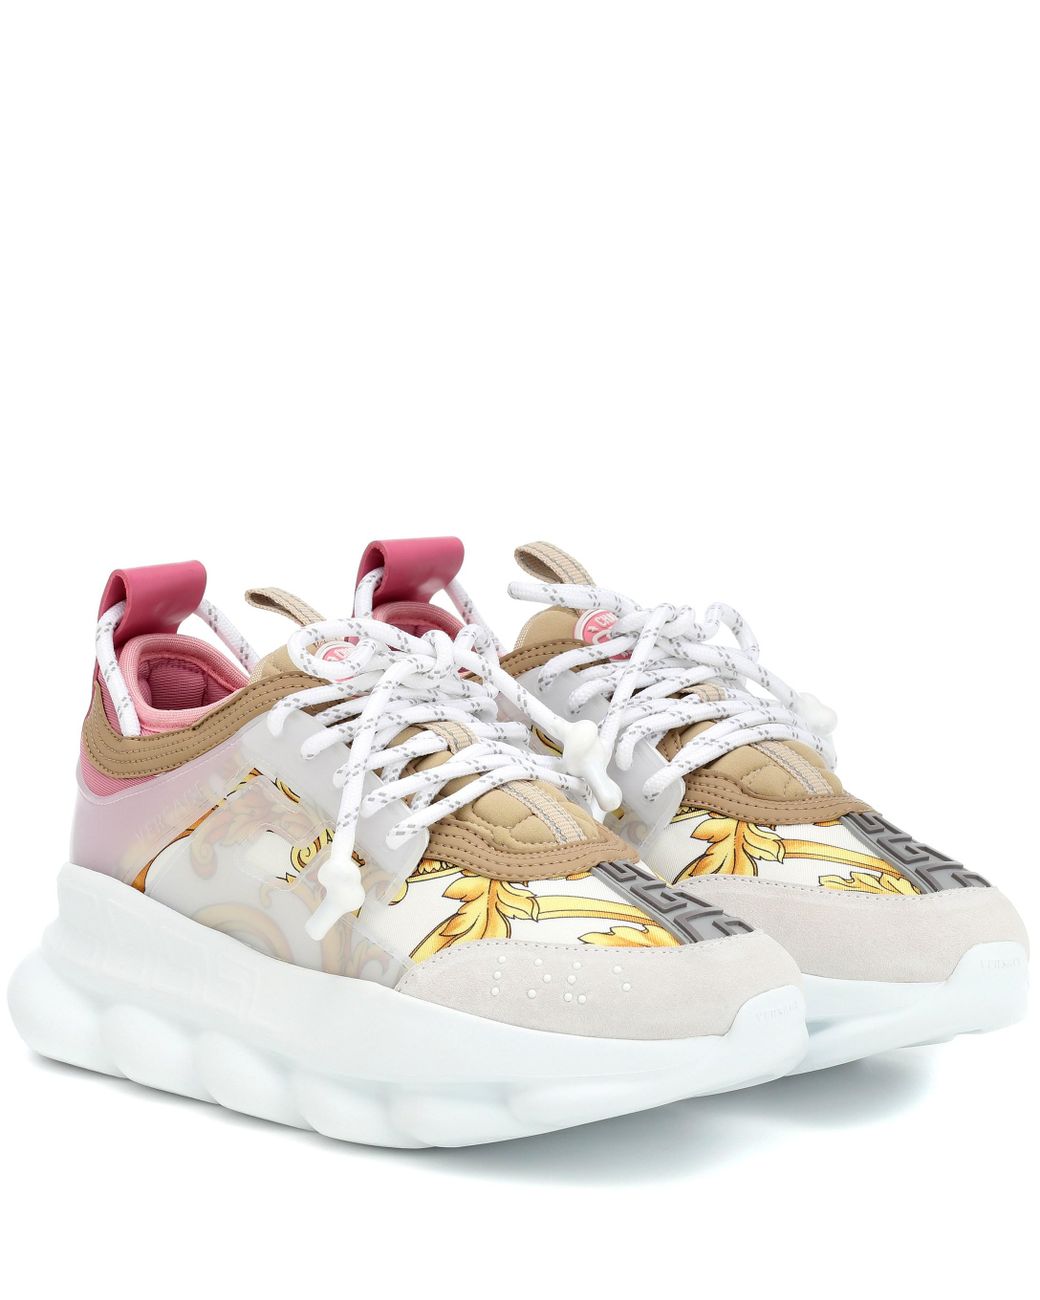 Versace Women's Shoes Trainers Sneakers Chain Reaction in Pink | Lyst